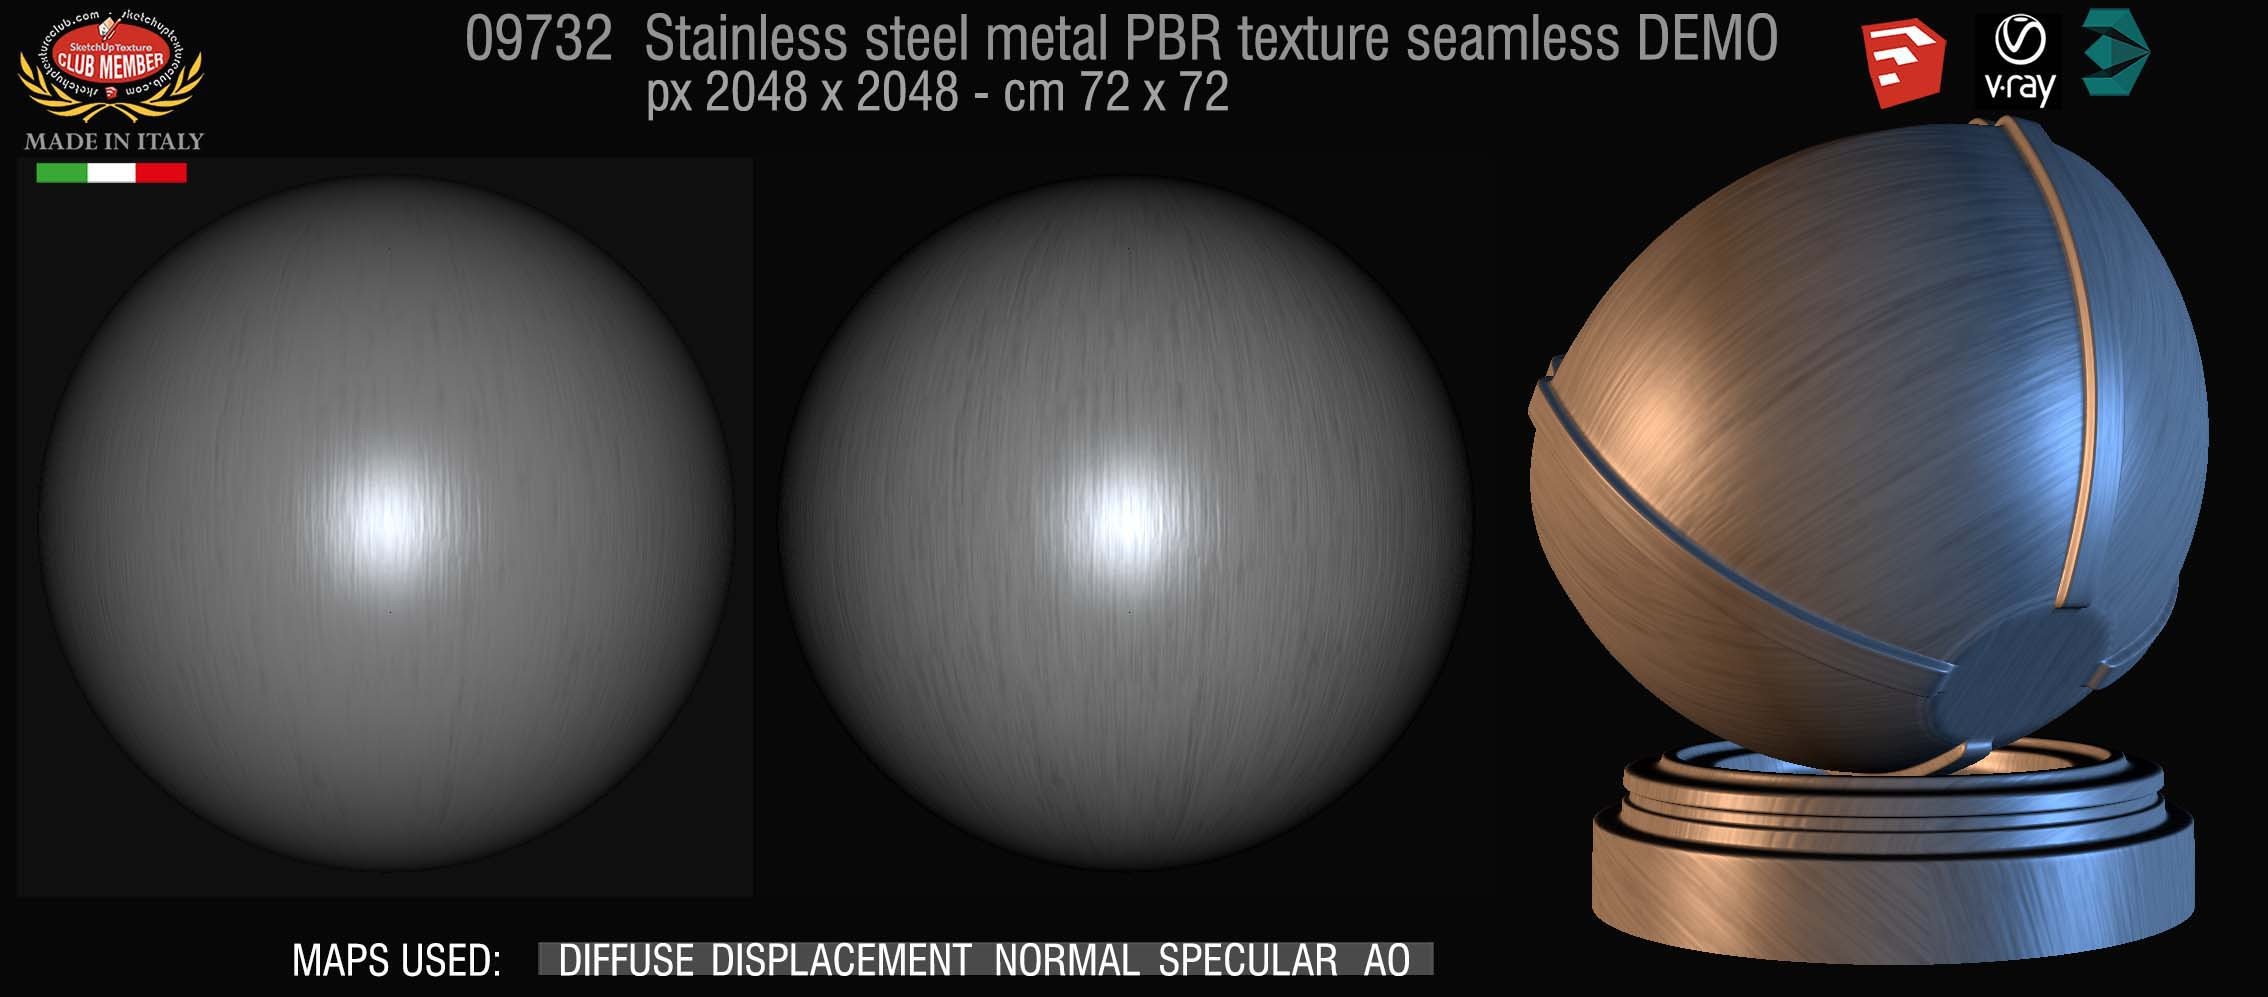 09732 Stainless steel metal PBR texture seamless DEMO